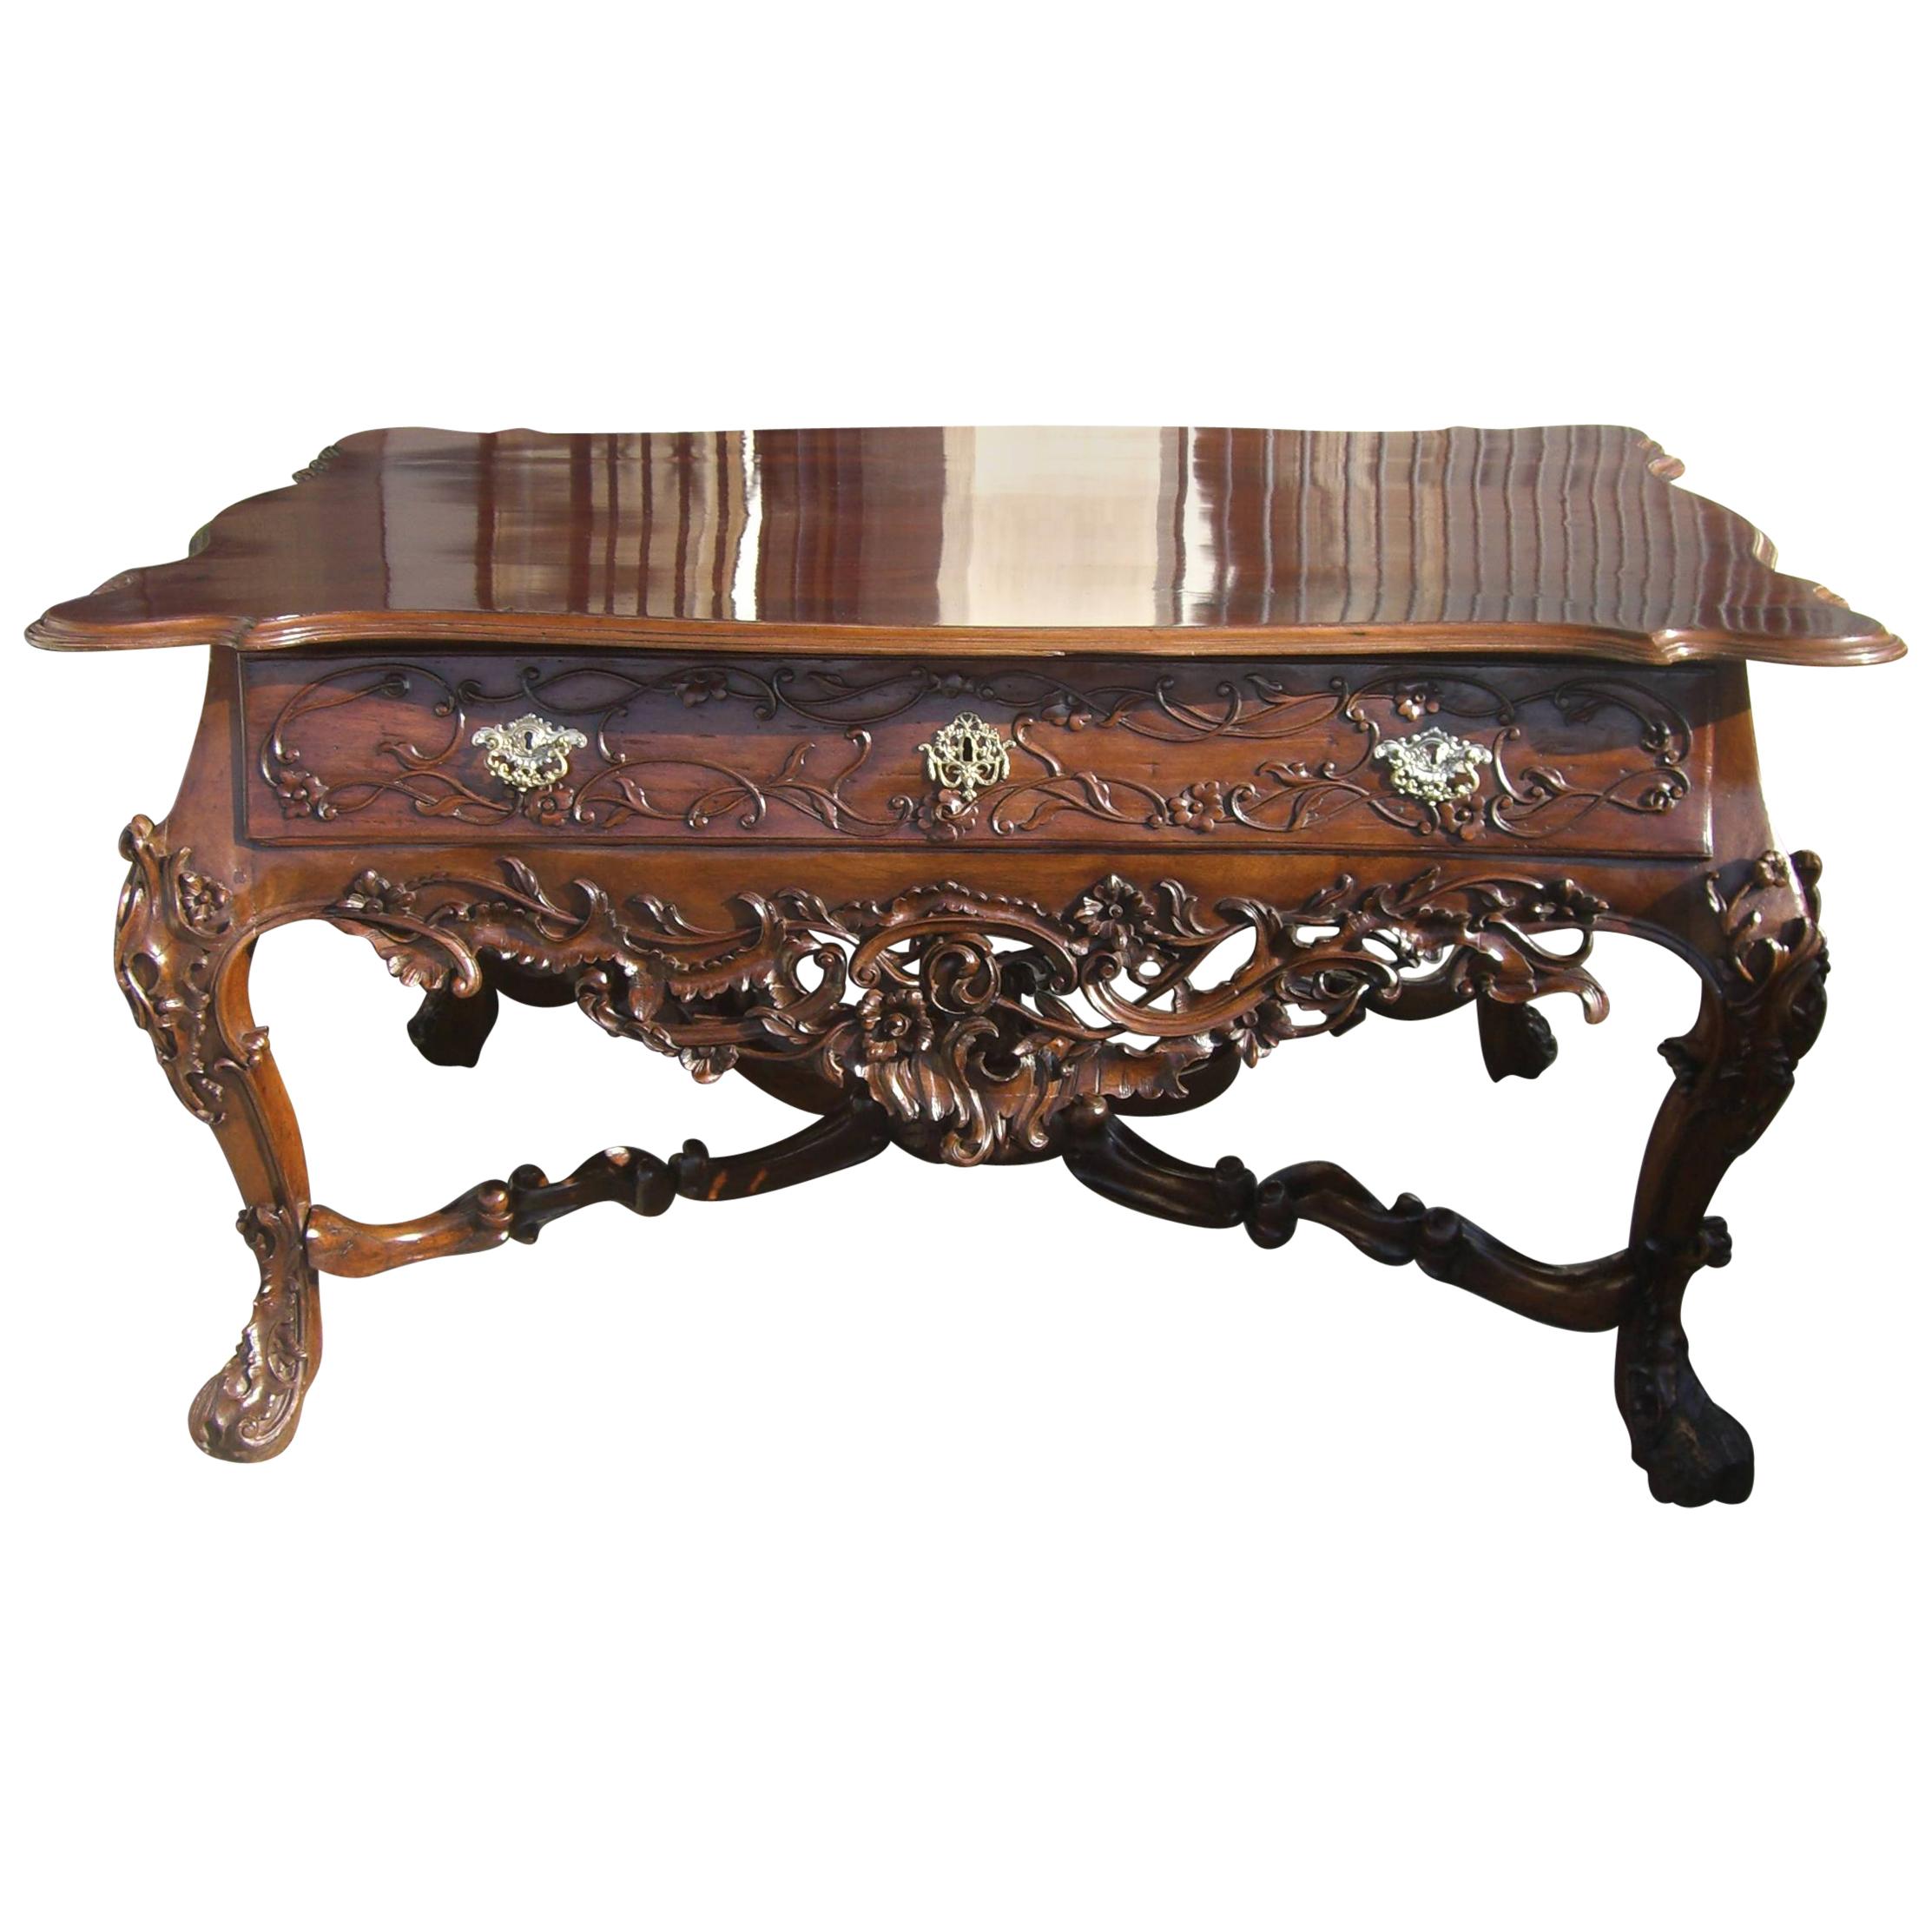 18th C. Portuguese Grand carved Hardwood Library Table Entry center Antiques LA For Sale